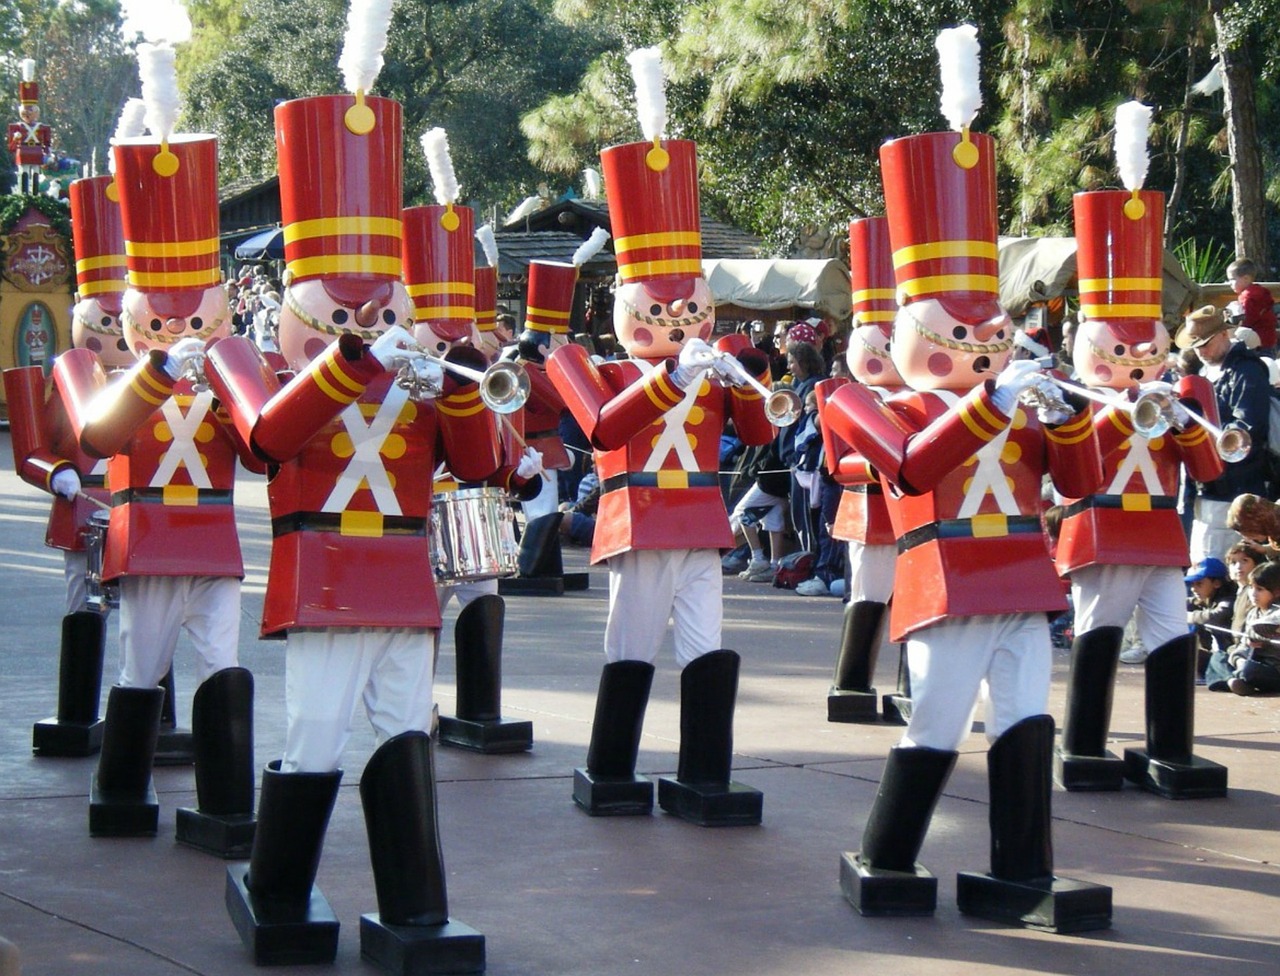 Christmas parade, band members dressed as toy soldiers